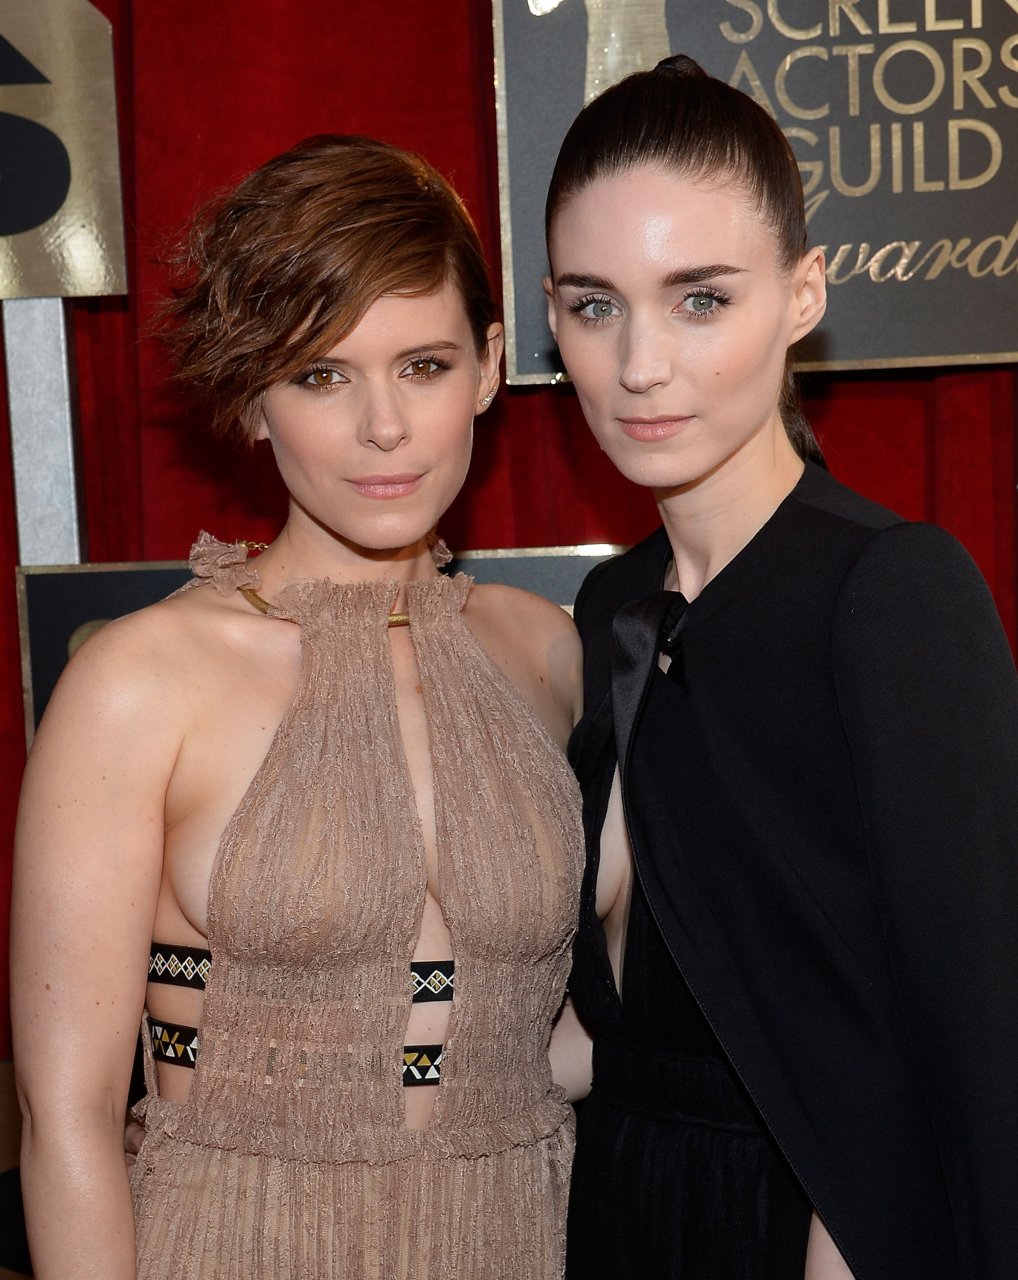 Kate and Rooney Mara Showing Their Perky Breasts on the Red Carpet